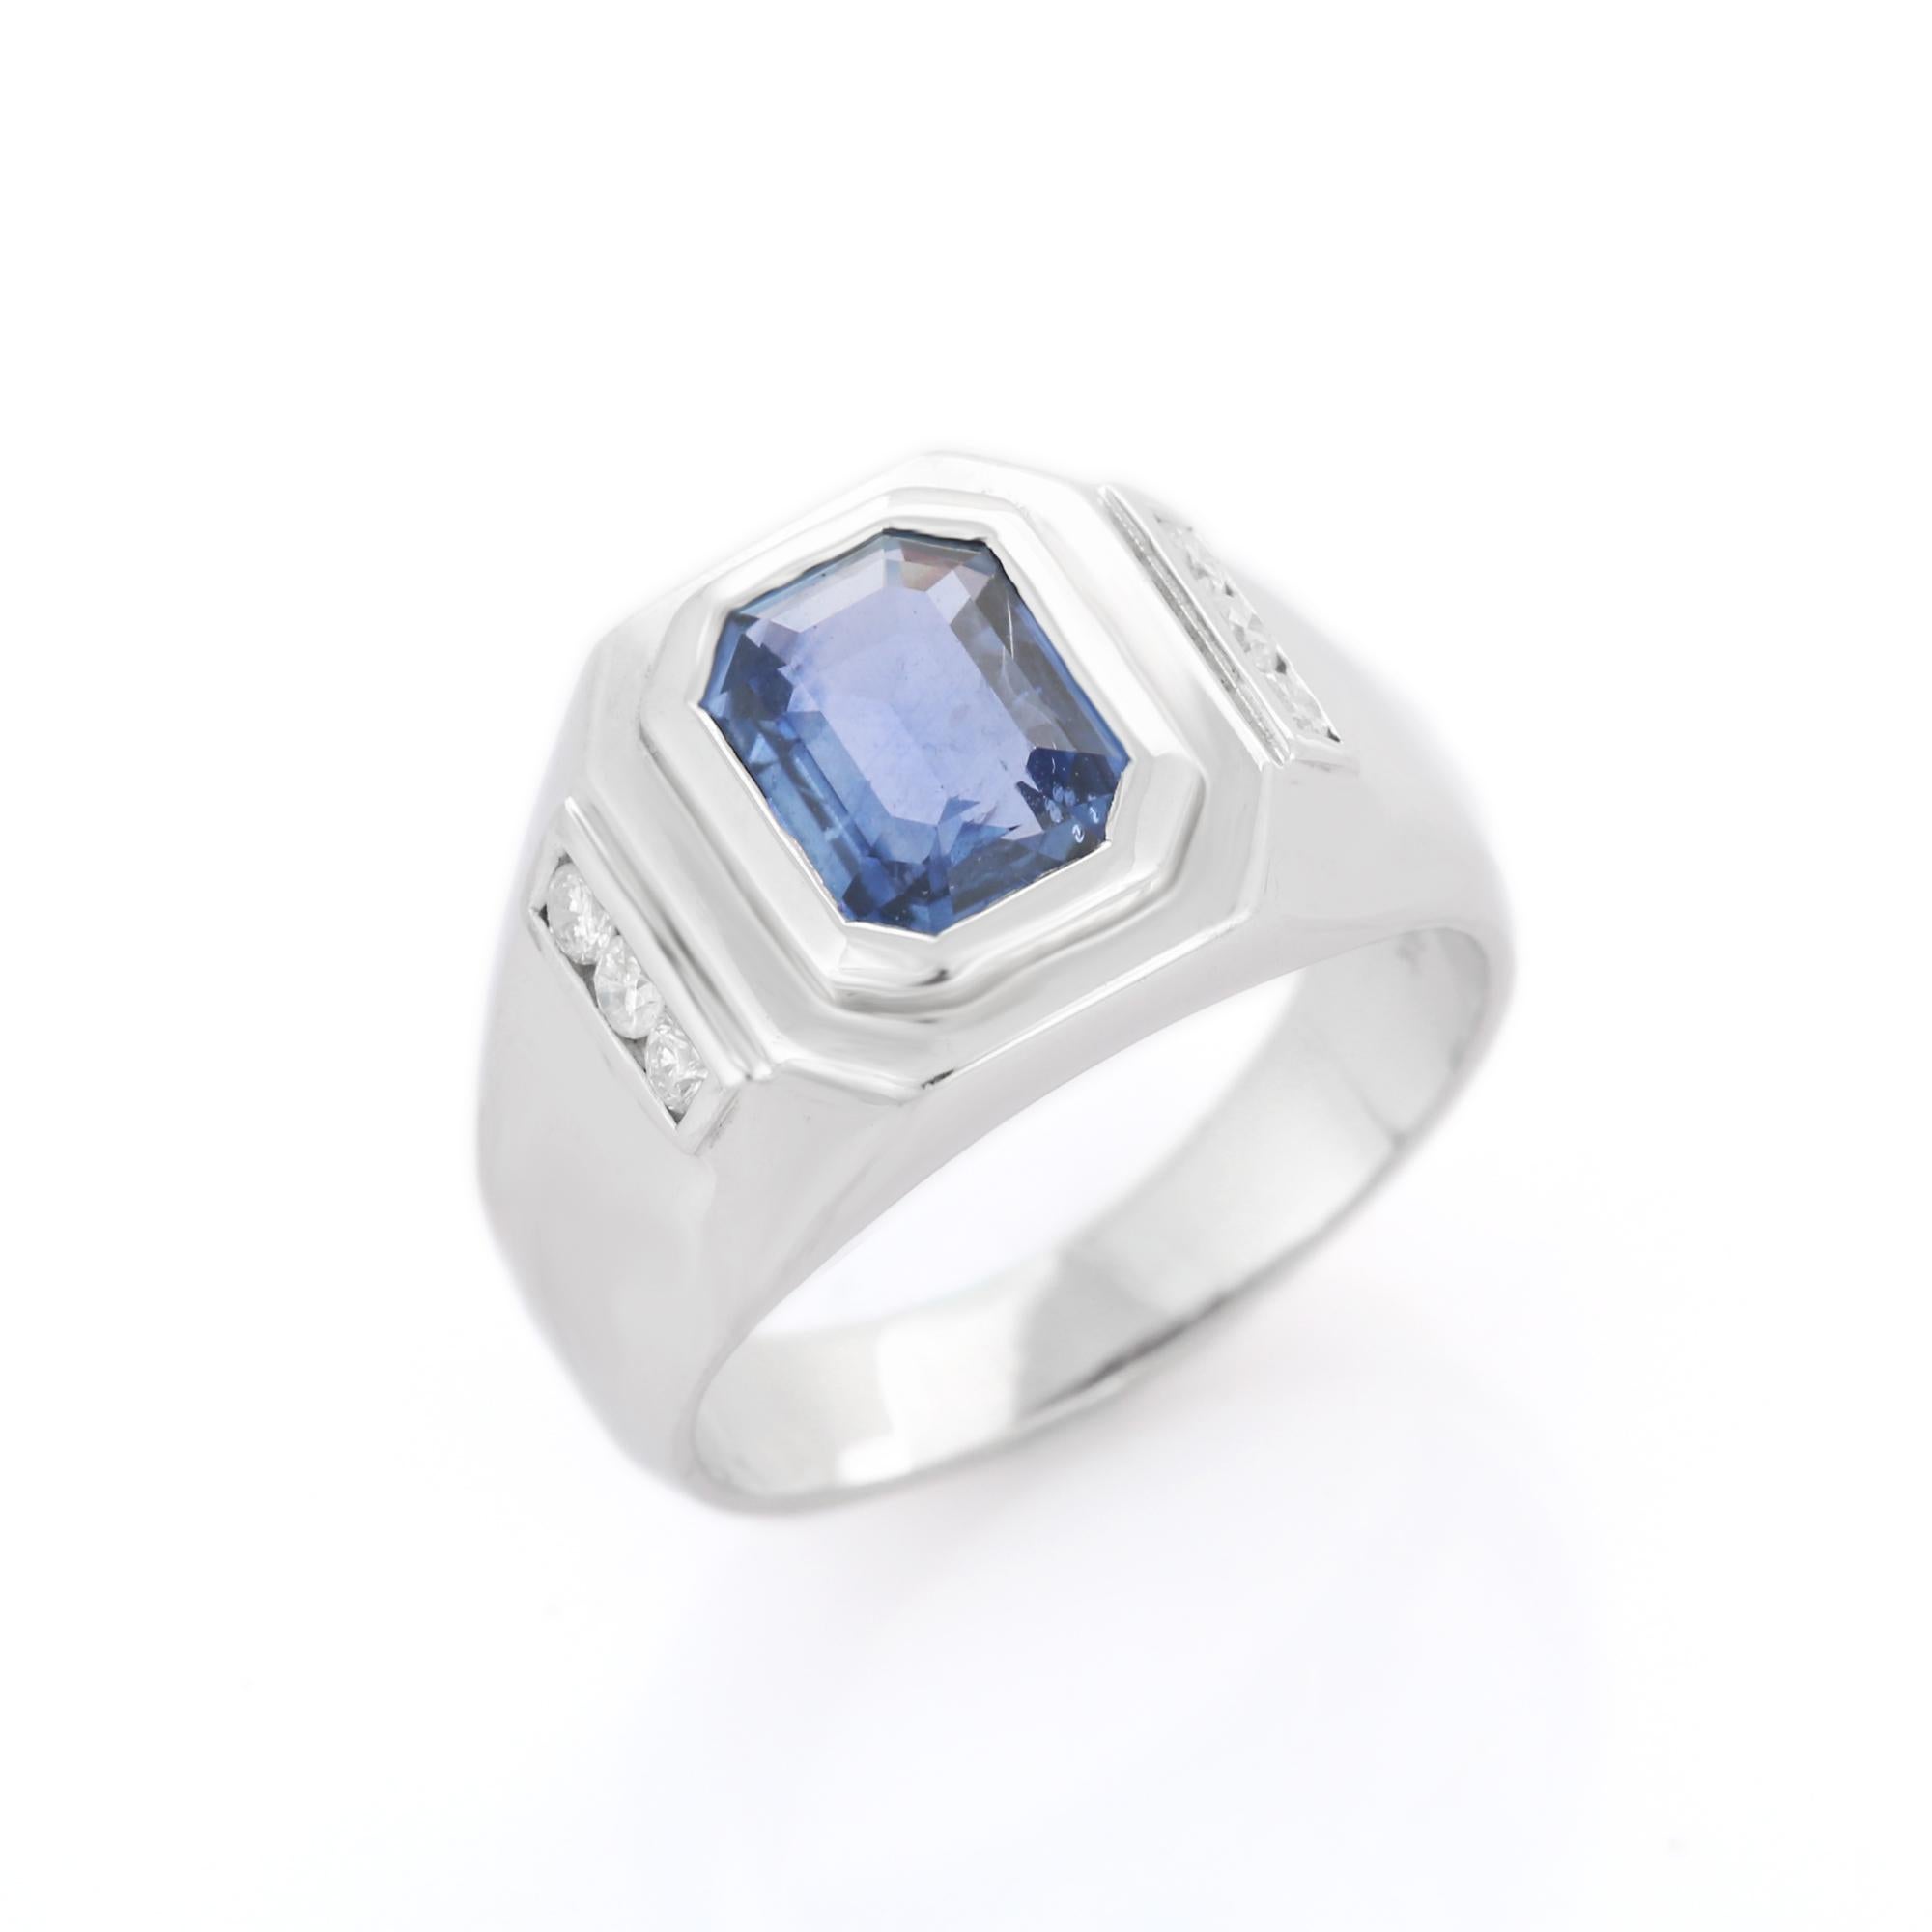 For Sale:  1.7 CTW Octagon Cut Blue Sapphire and Diamond Men's Wedding Ring 18k White Gold 2